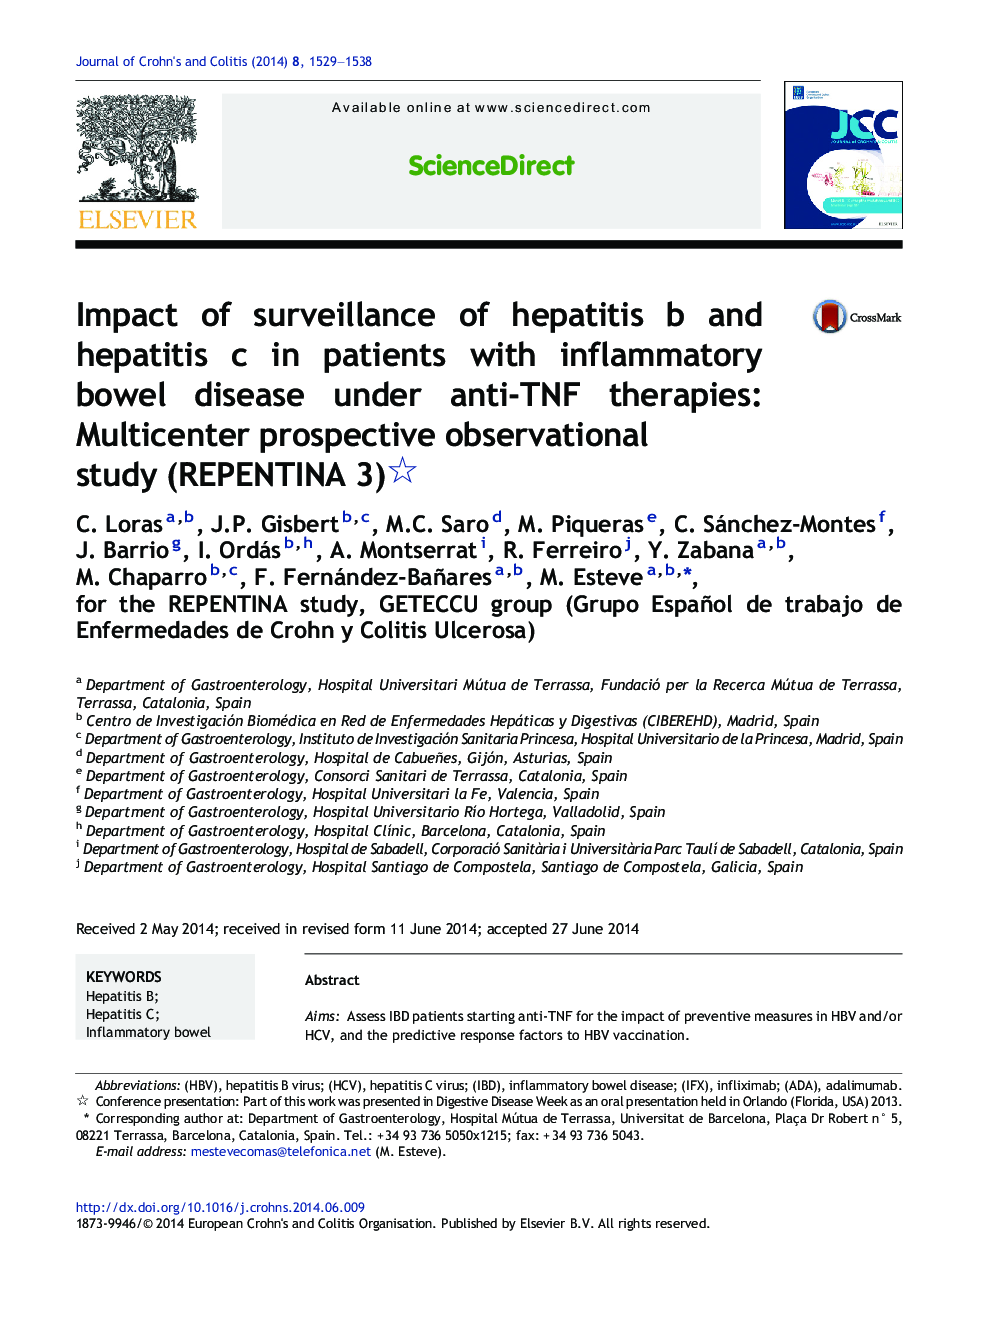 Impact of surveillance of hepatitis b and hepatitis c in patients with inflammatory bowel disease under anti-TNF therapies: Multicenter prospective observational study (REPENTINA 3)